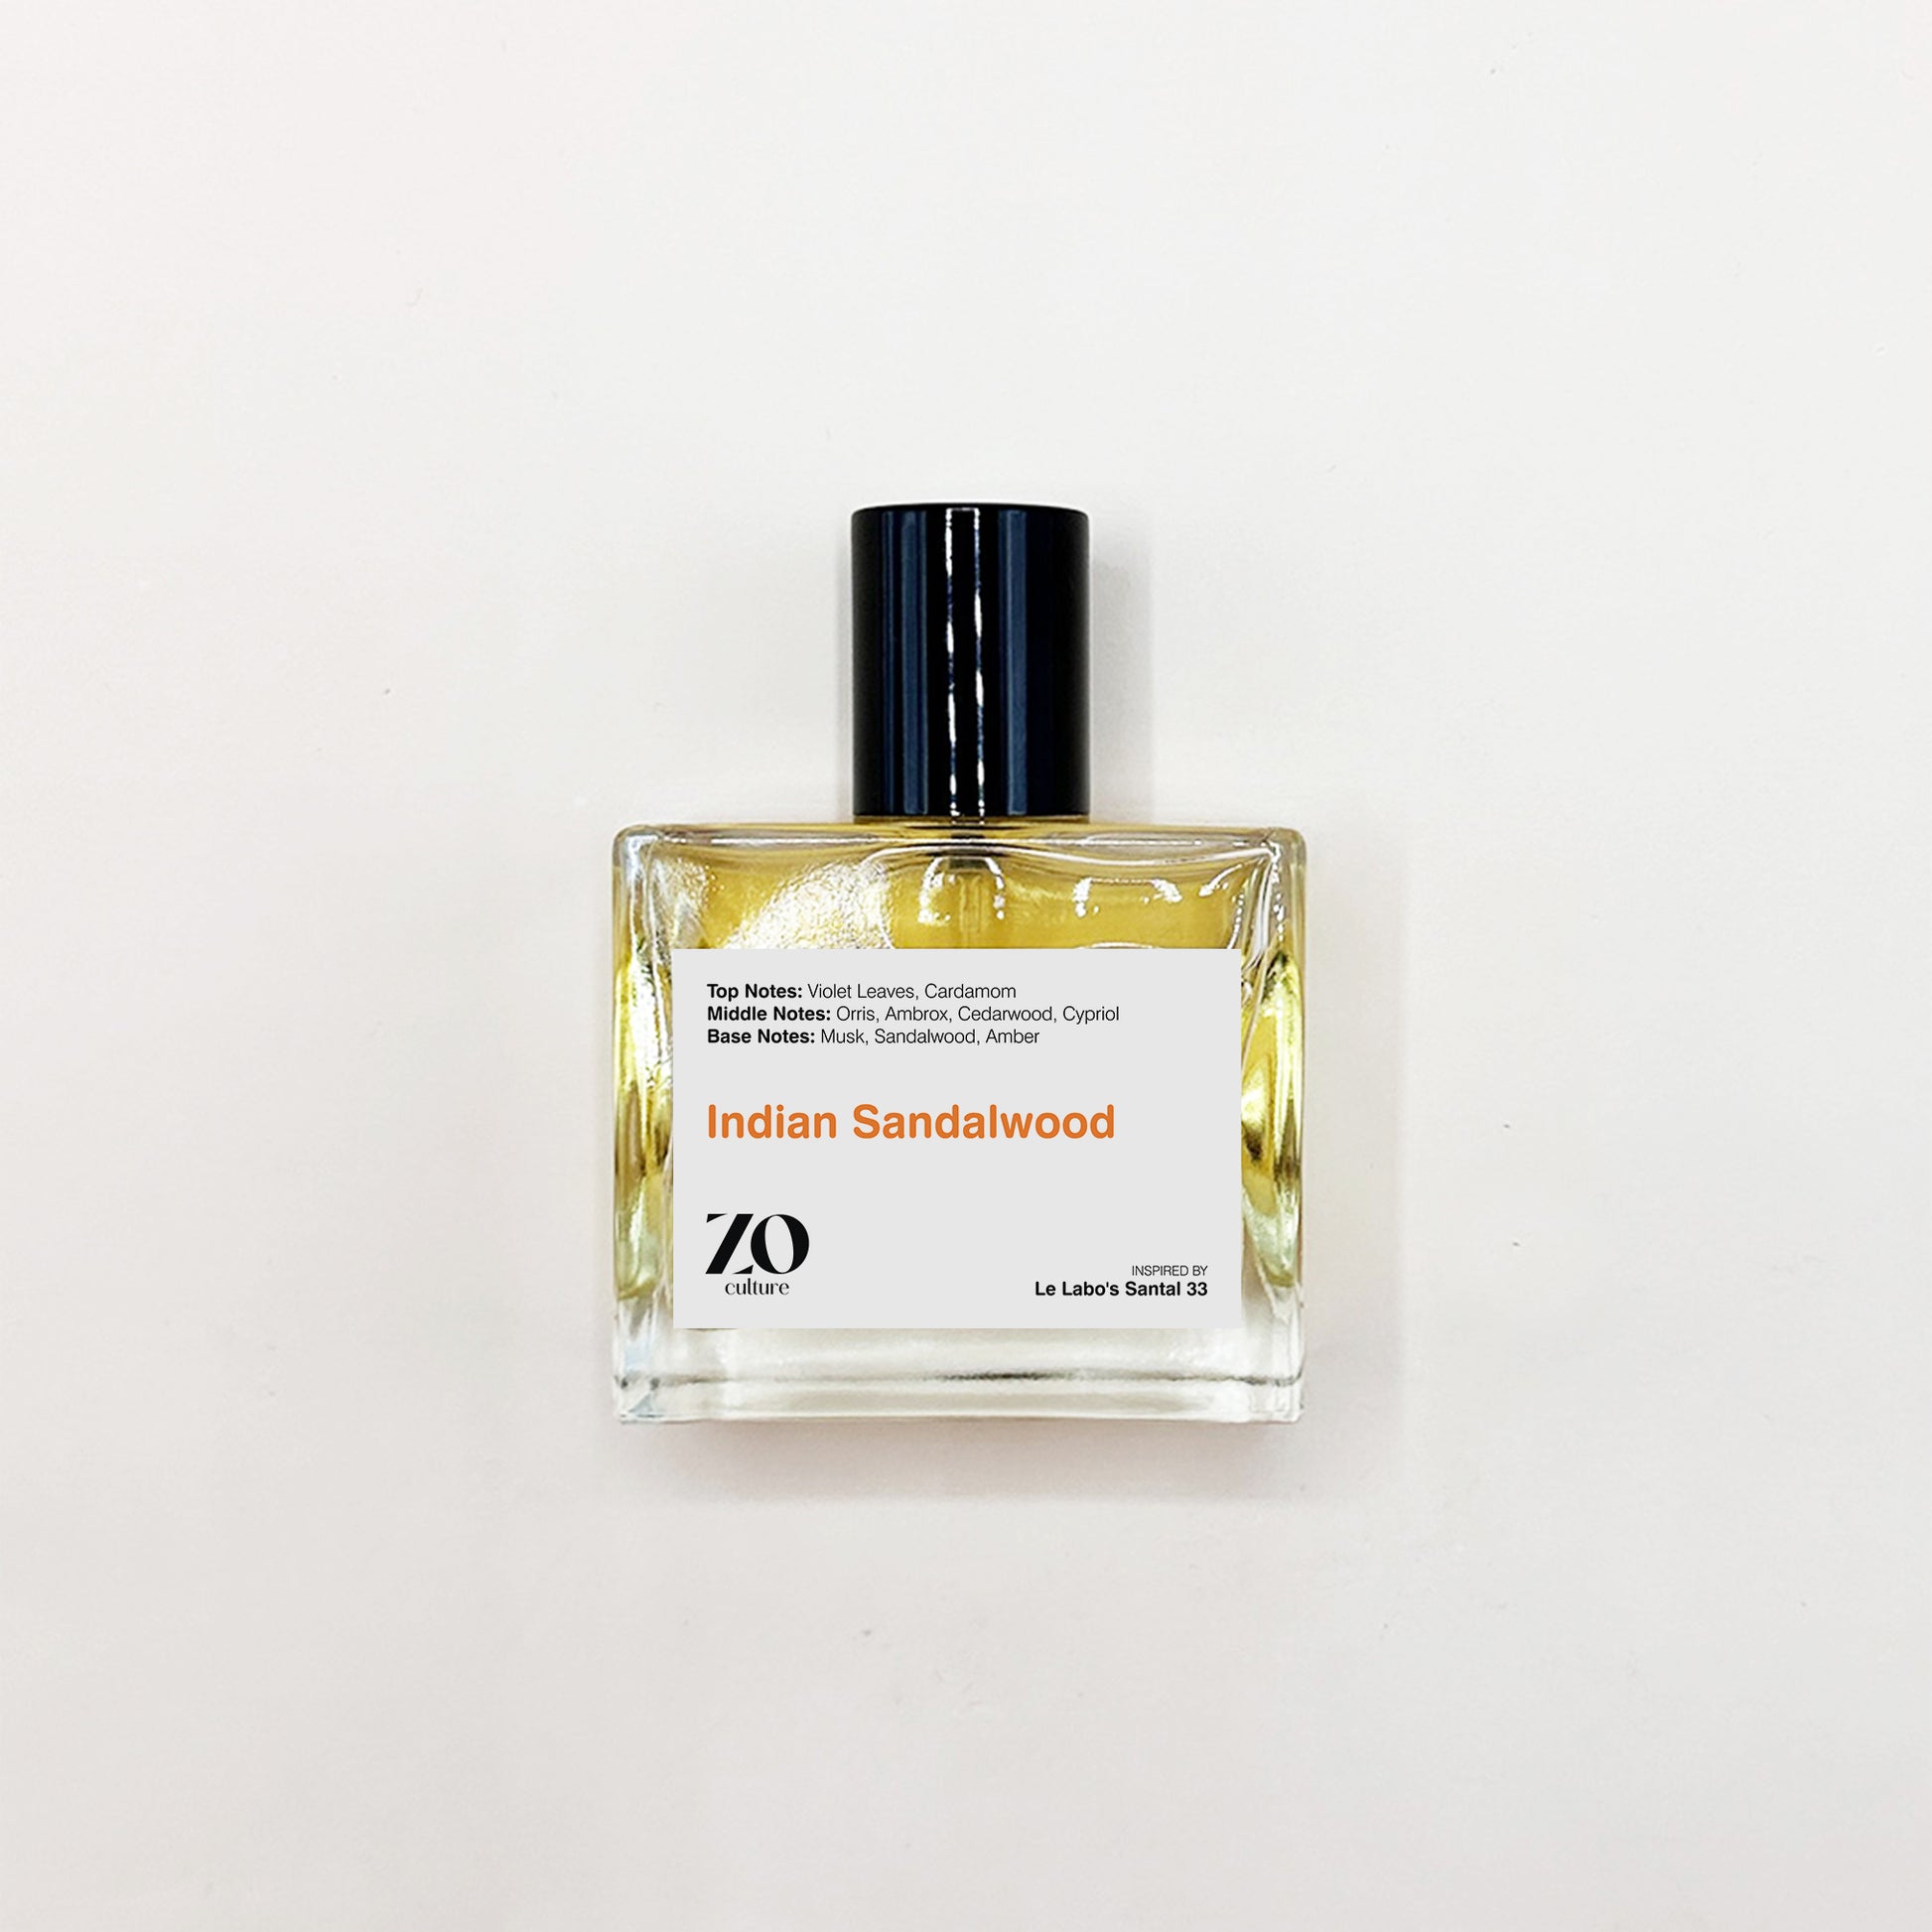 Unisex Indian Sandalwood - Inspired by Santal 33 ZoCulture